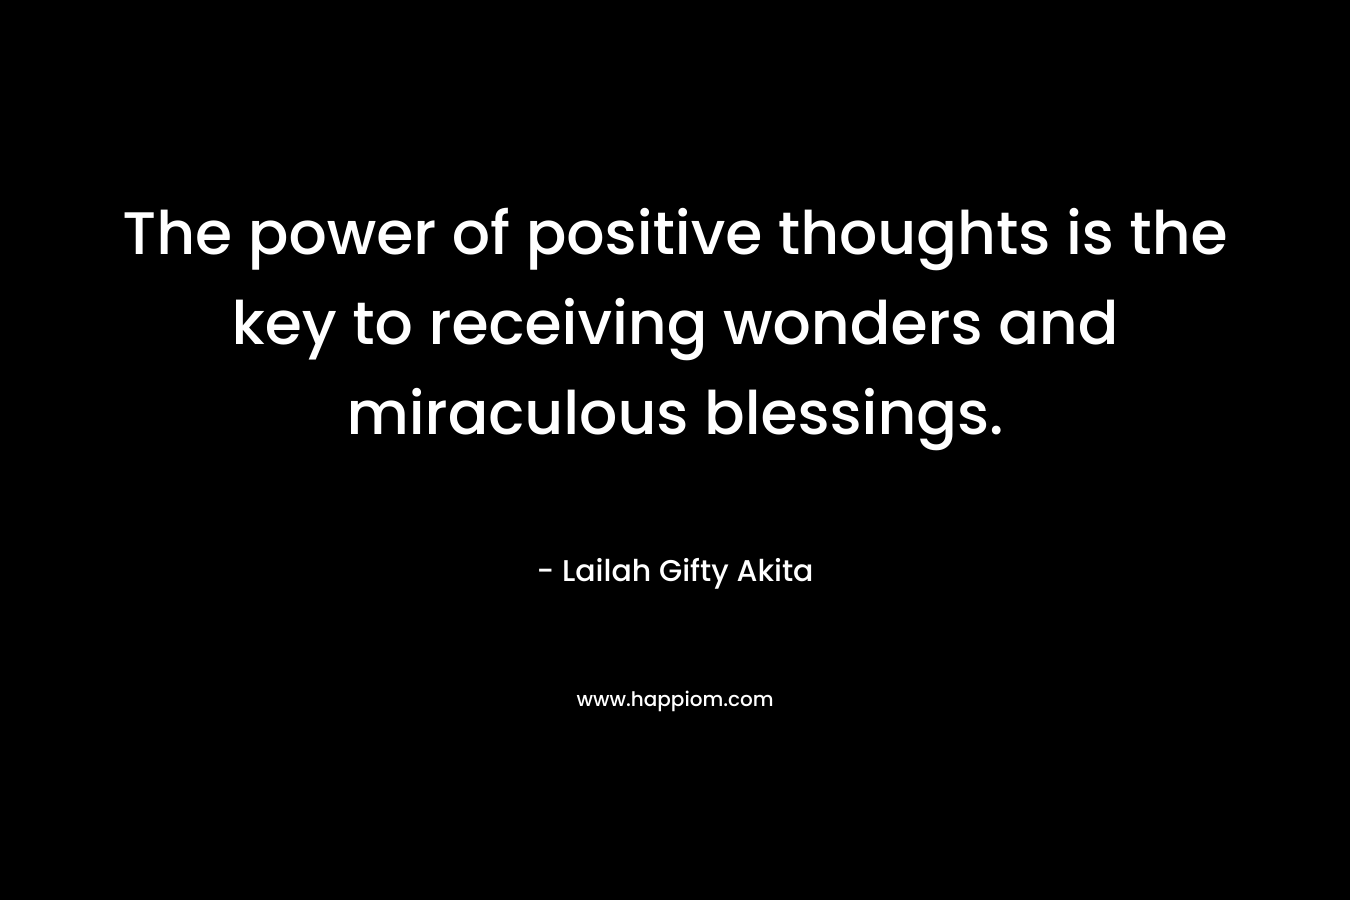 The power of positive thoughts is the key to receiving wonders and miraculous blessings.